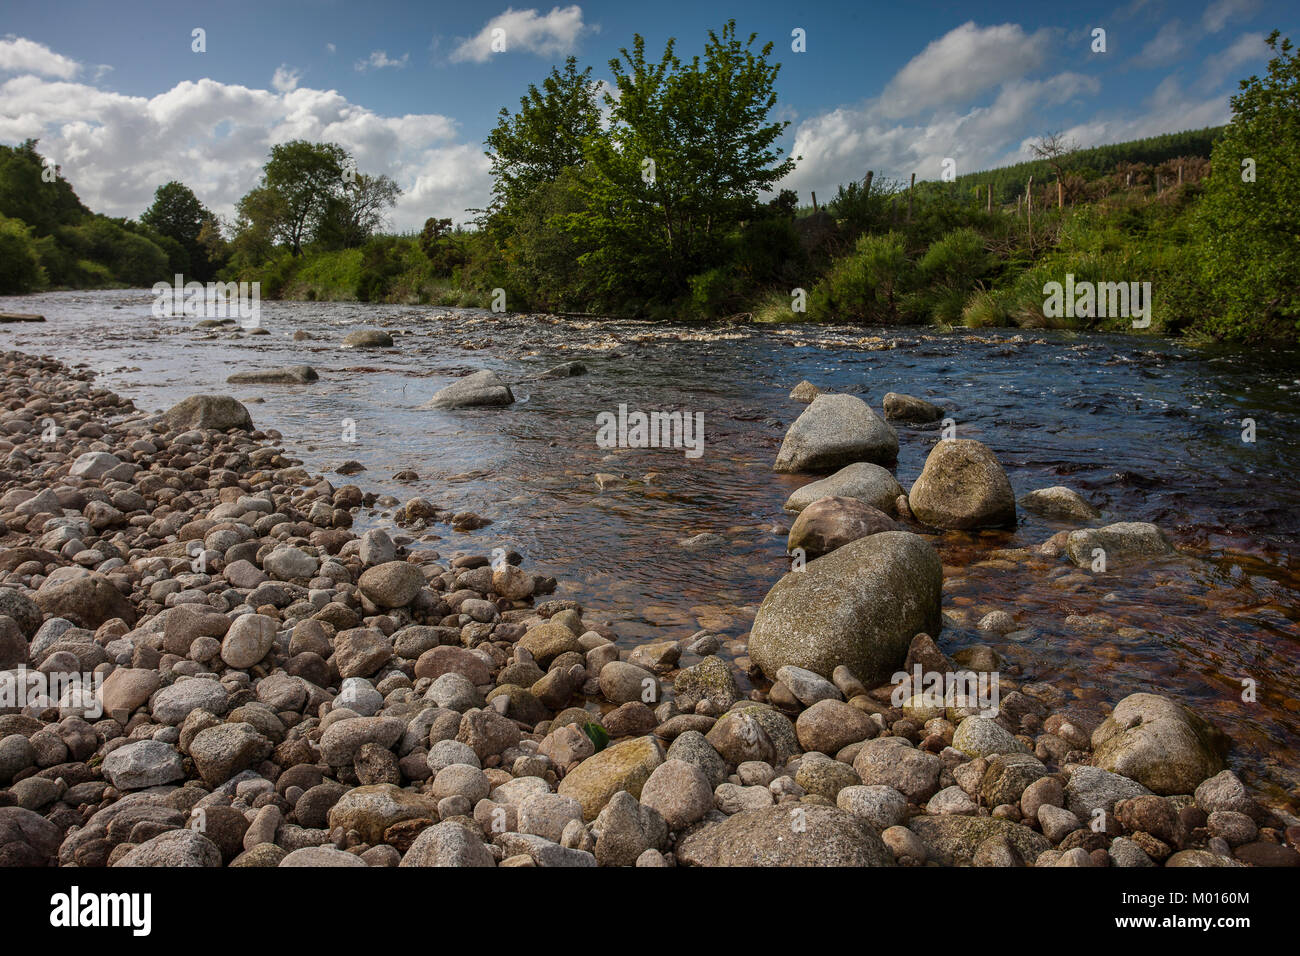 A Photo of a River in the wicklow Mountains Stock Photo